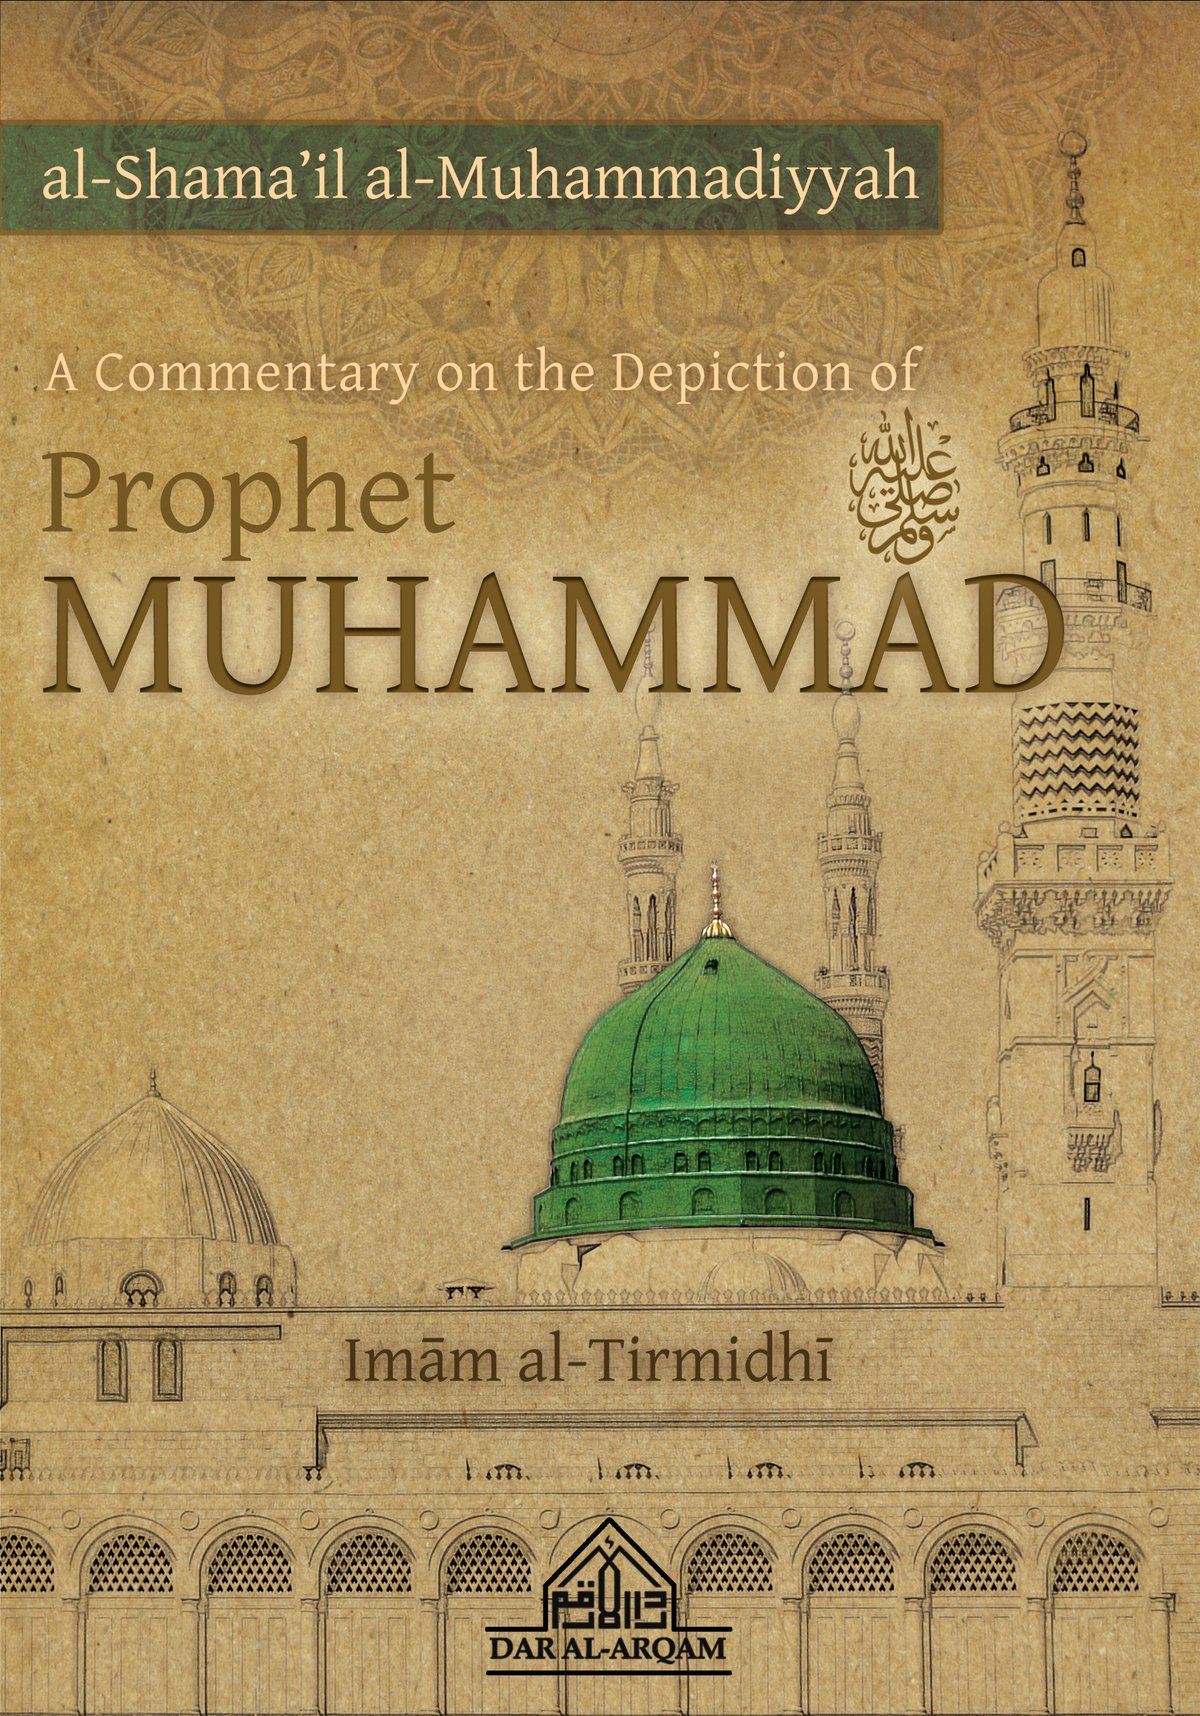 Image of A Commentary on the Depiction of the Prophet